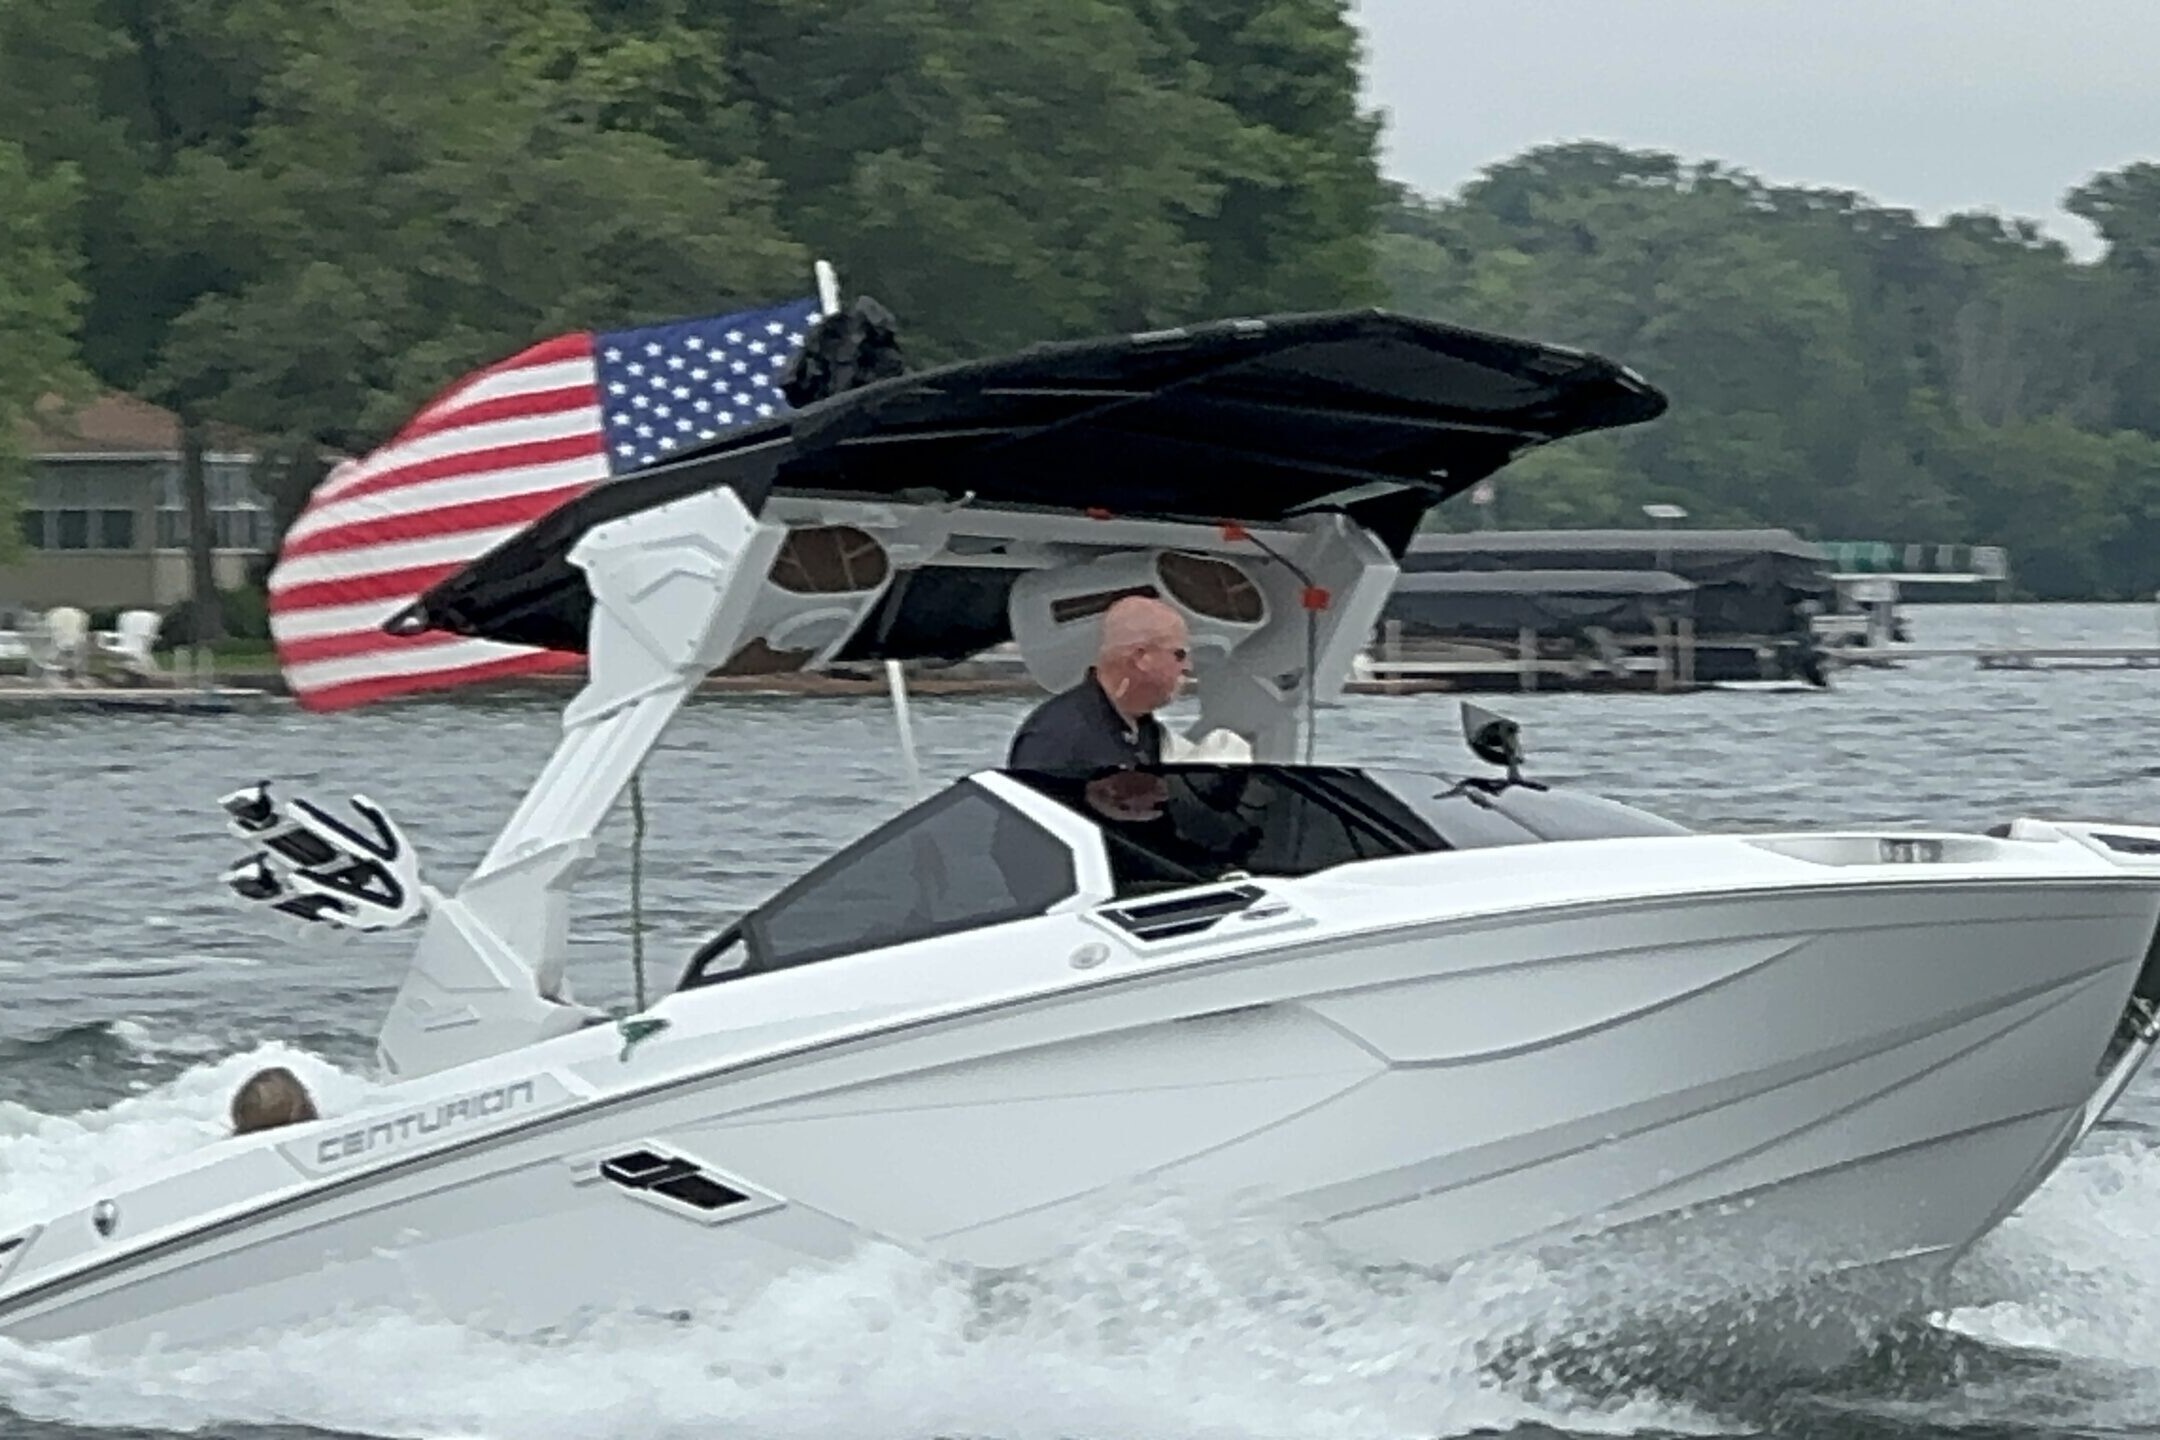 A person navigates a white Centurion boat on a lake, with an American flag displayed on the boat's canopy. Trees and houses are visible in the background, showcasing the serene setting of the King of the Lakes Classic.